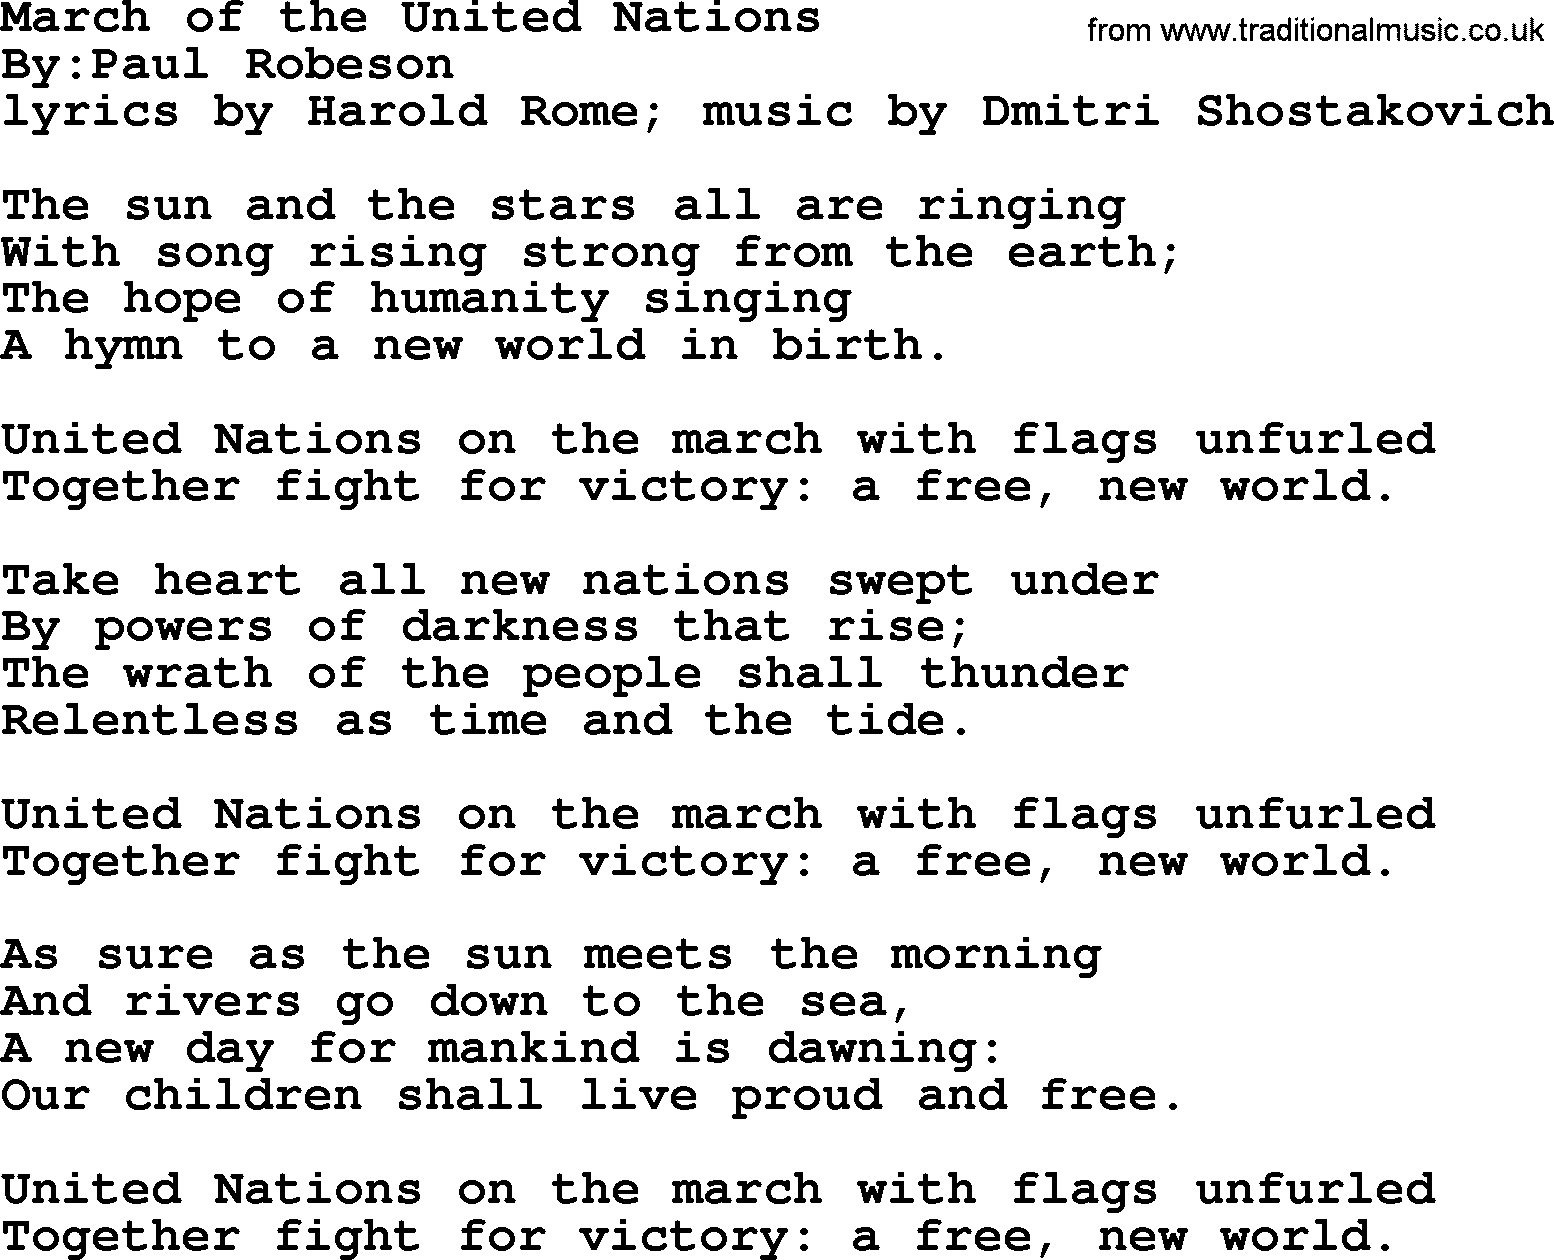 Political, Solidarity, Workers or Union song: March Of The United Nations, lyrics